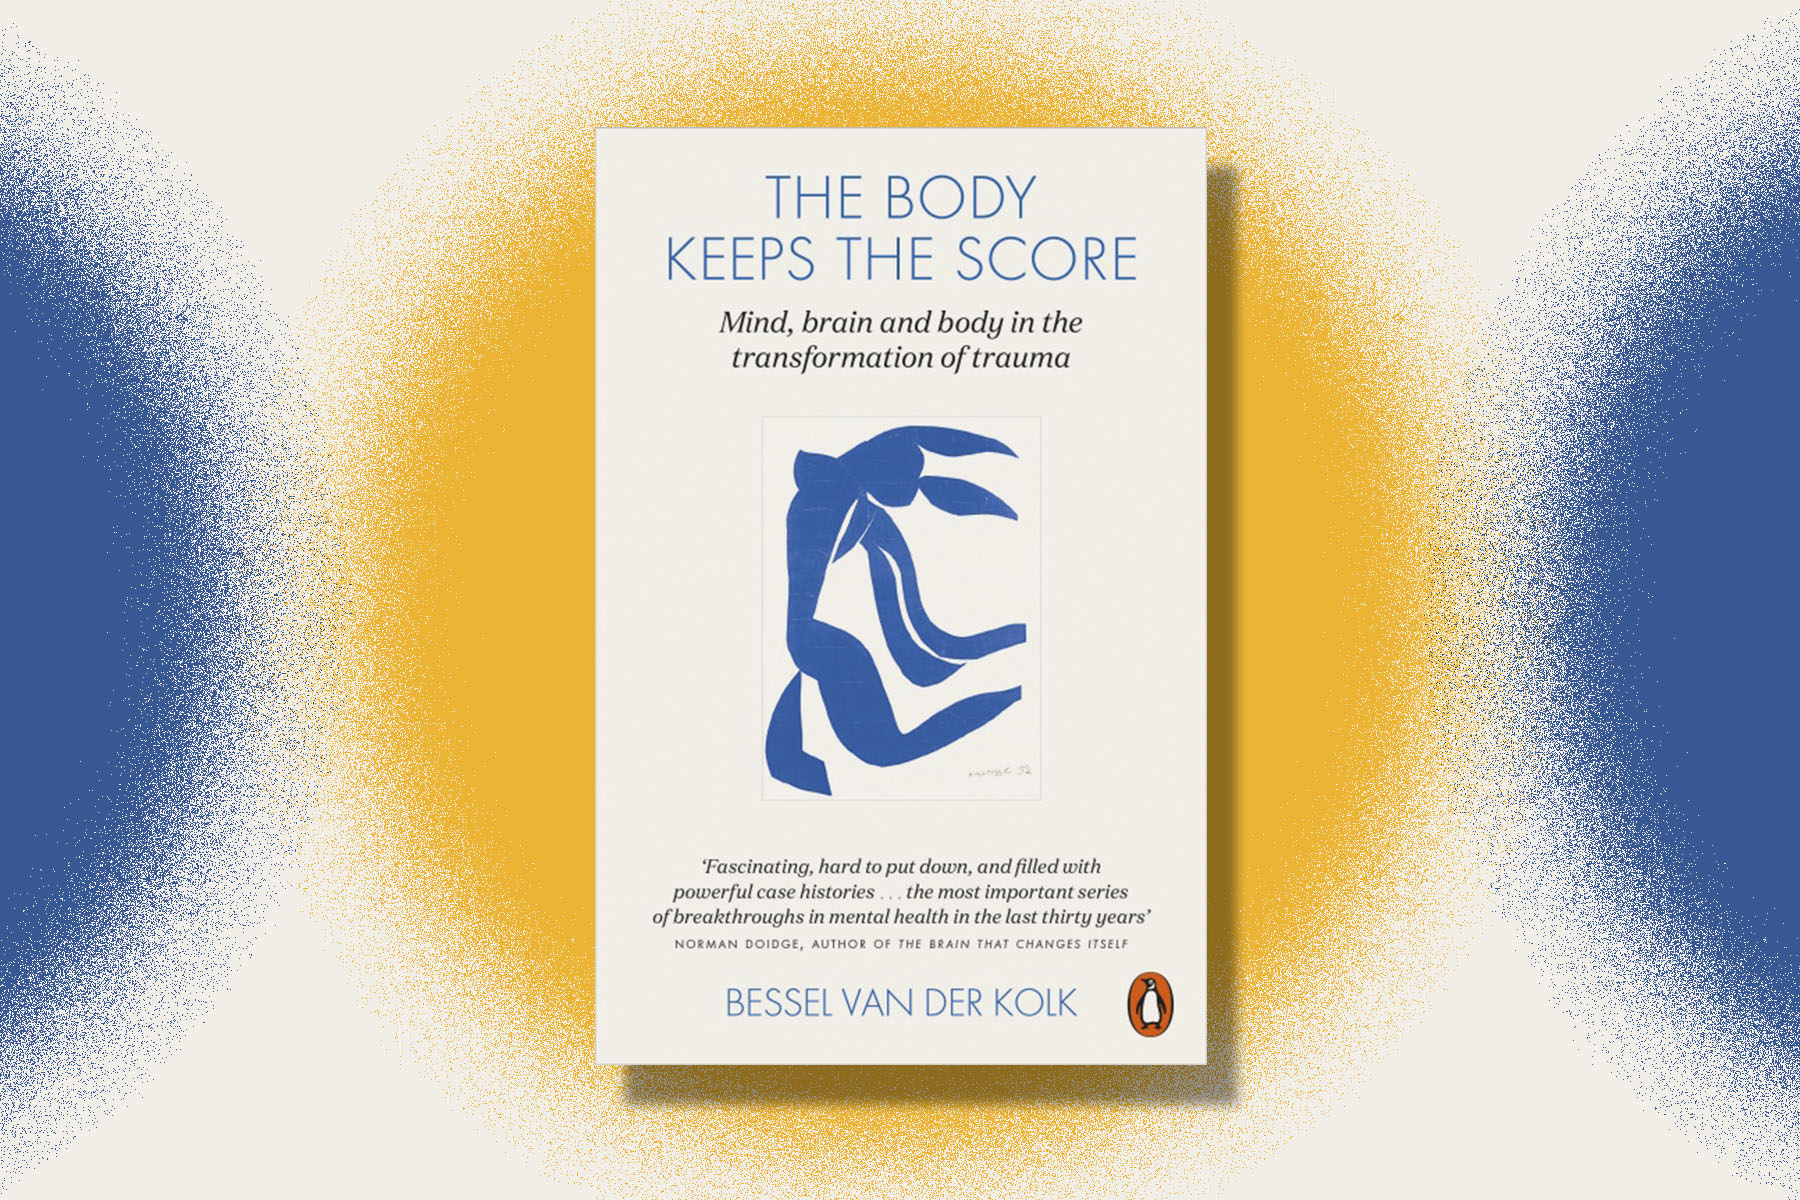 The book cover for The Body Keeps the Score against a white background with blue and yellow splotches.